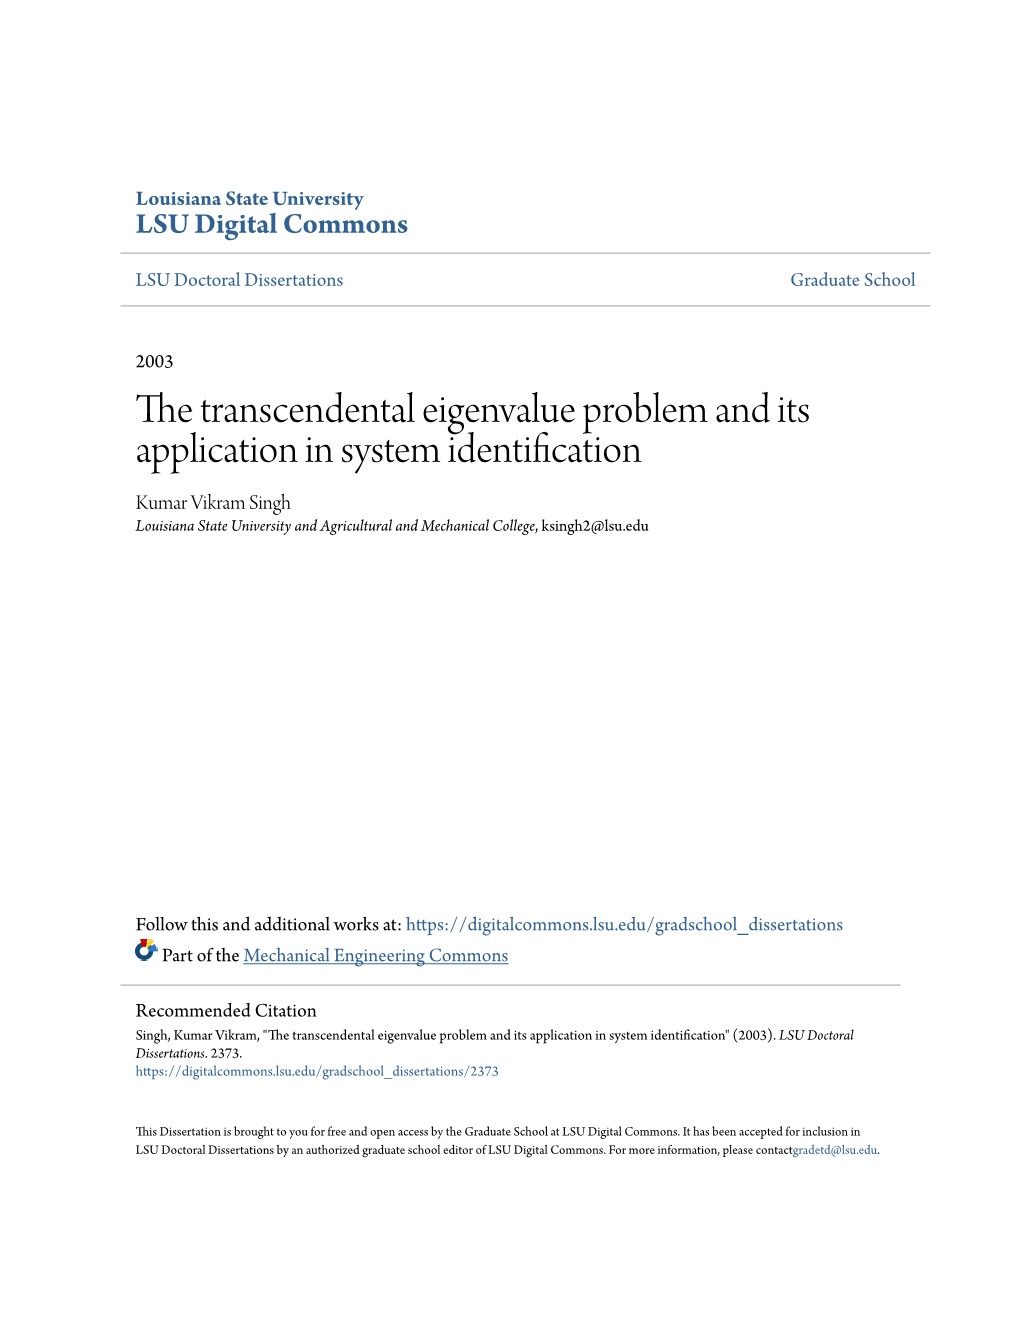 The Transcendental Eigenvalue Problem and Its Application In